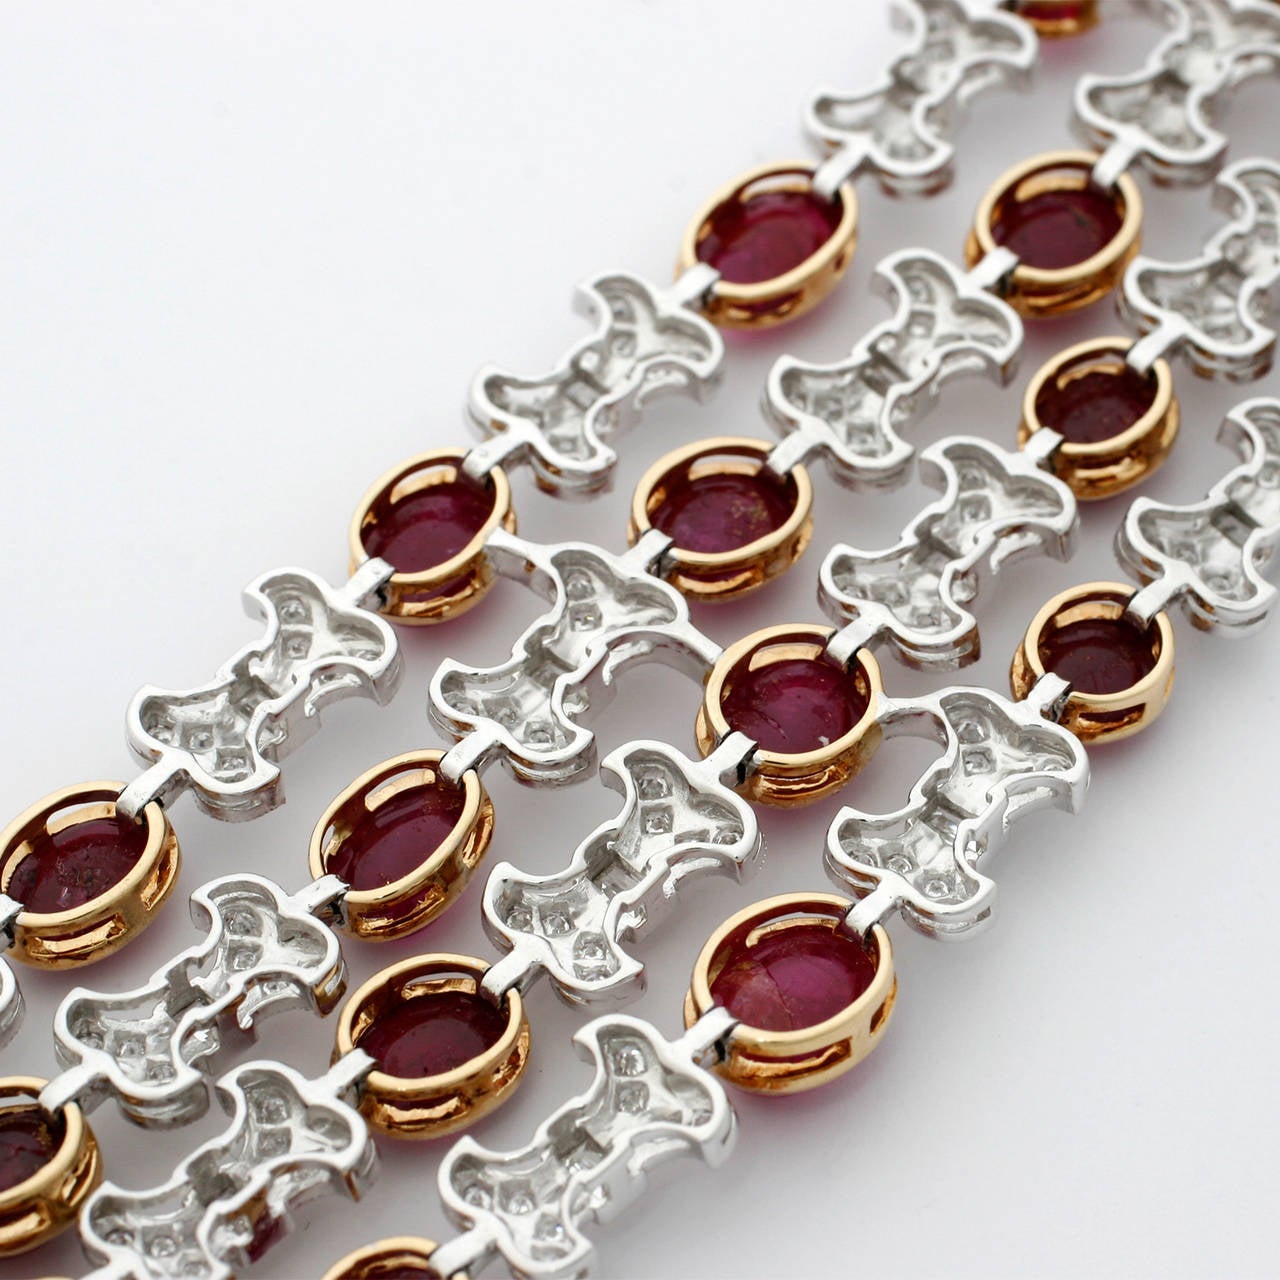 Cabuchon Burma Ruby Diamond Platinum Bracelet In New Condition For Sale In Louisville, KY